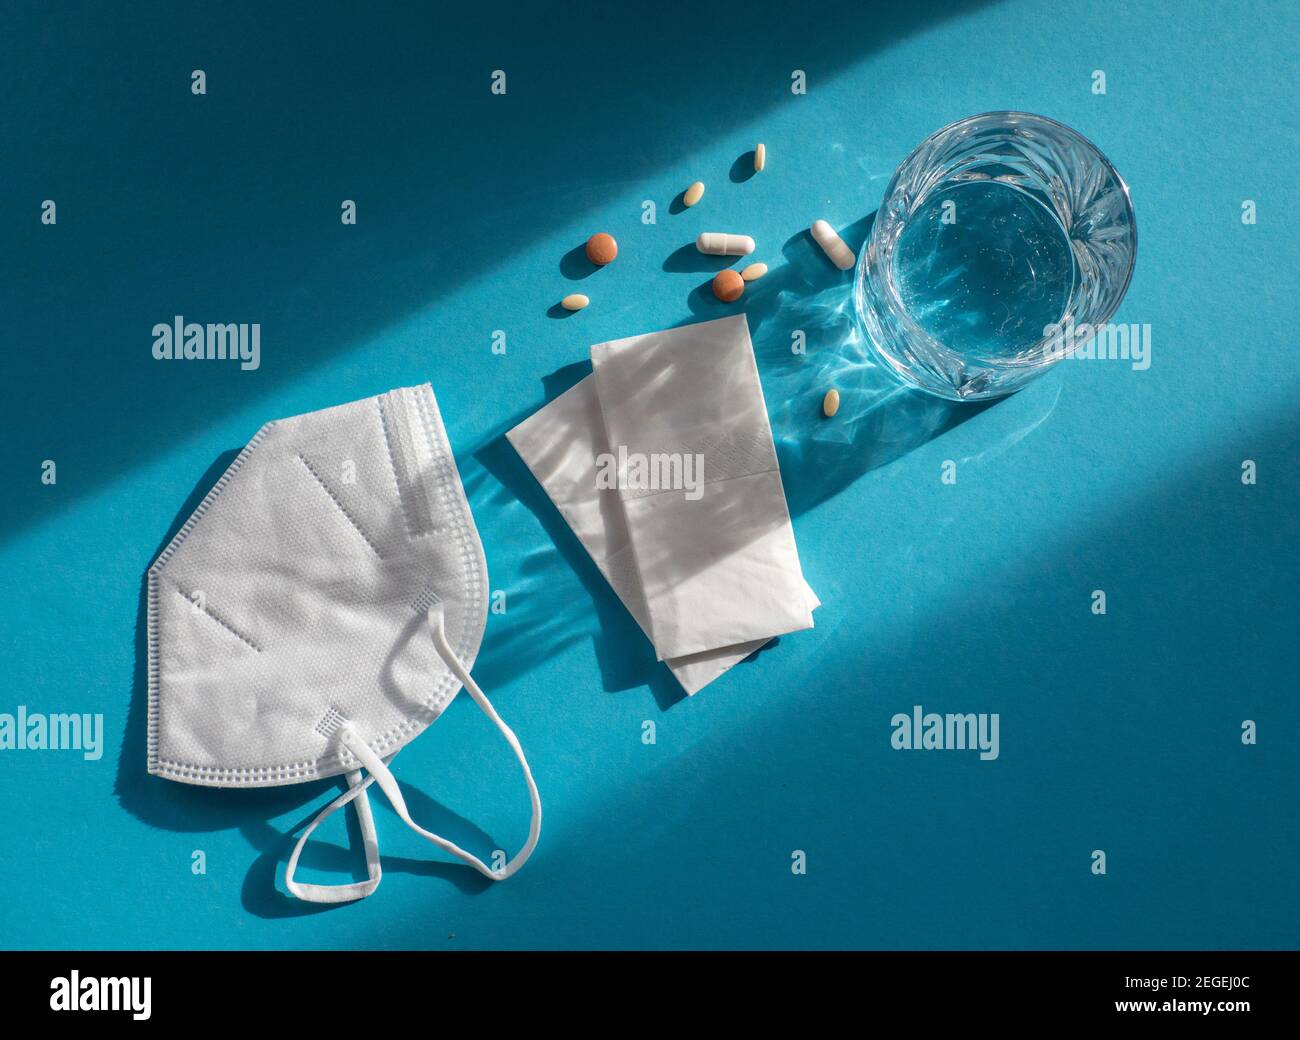 Medicine, water and tissues for a possible Corona infection or cold Stock Photo